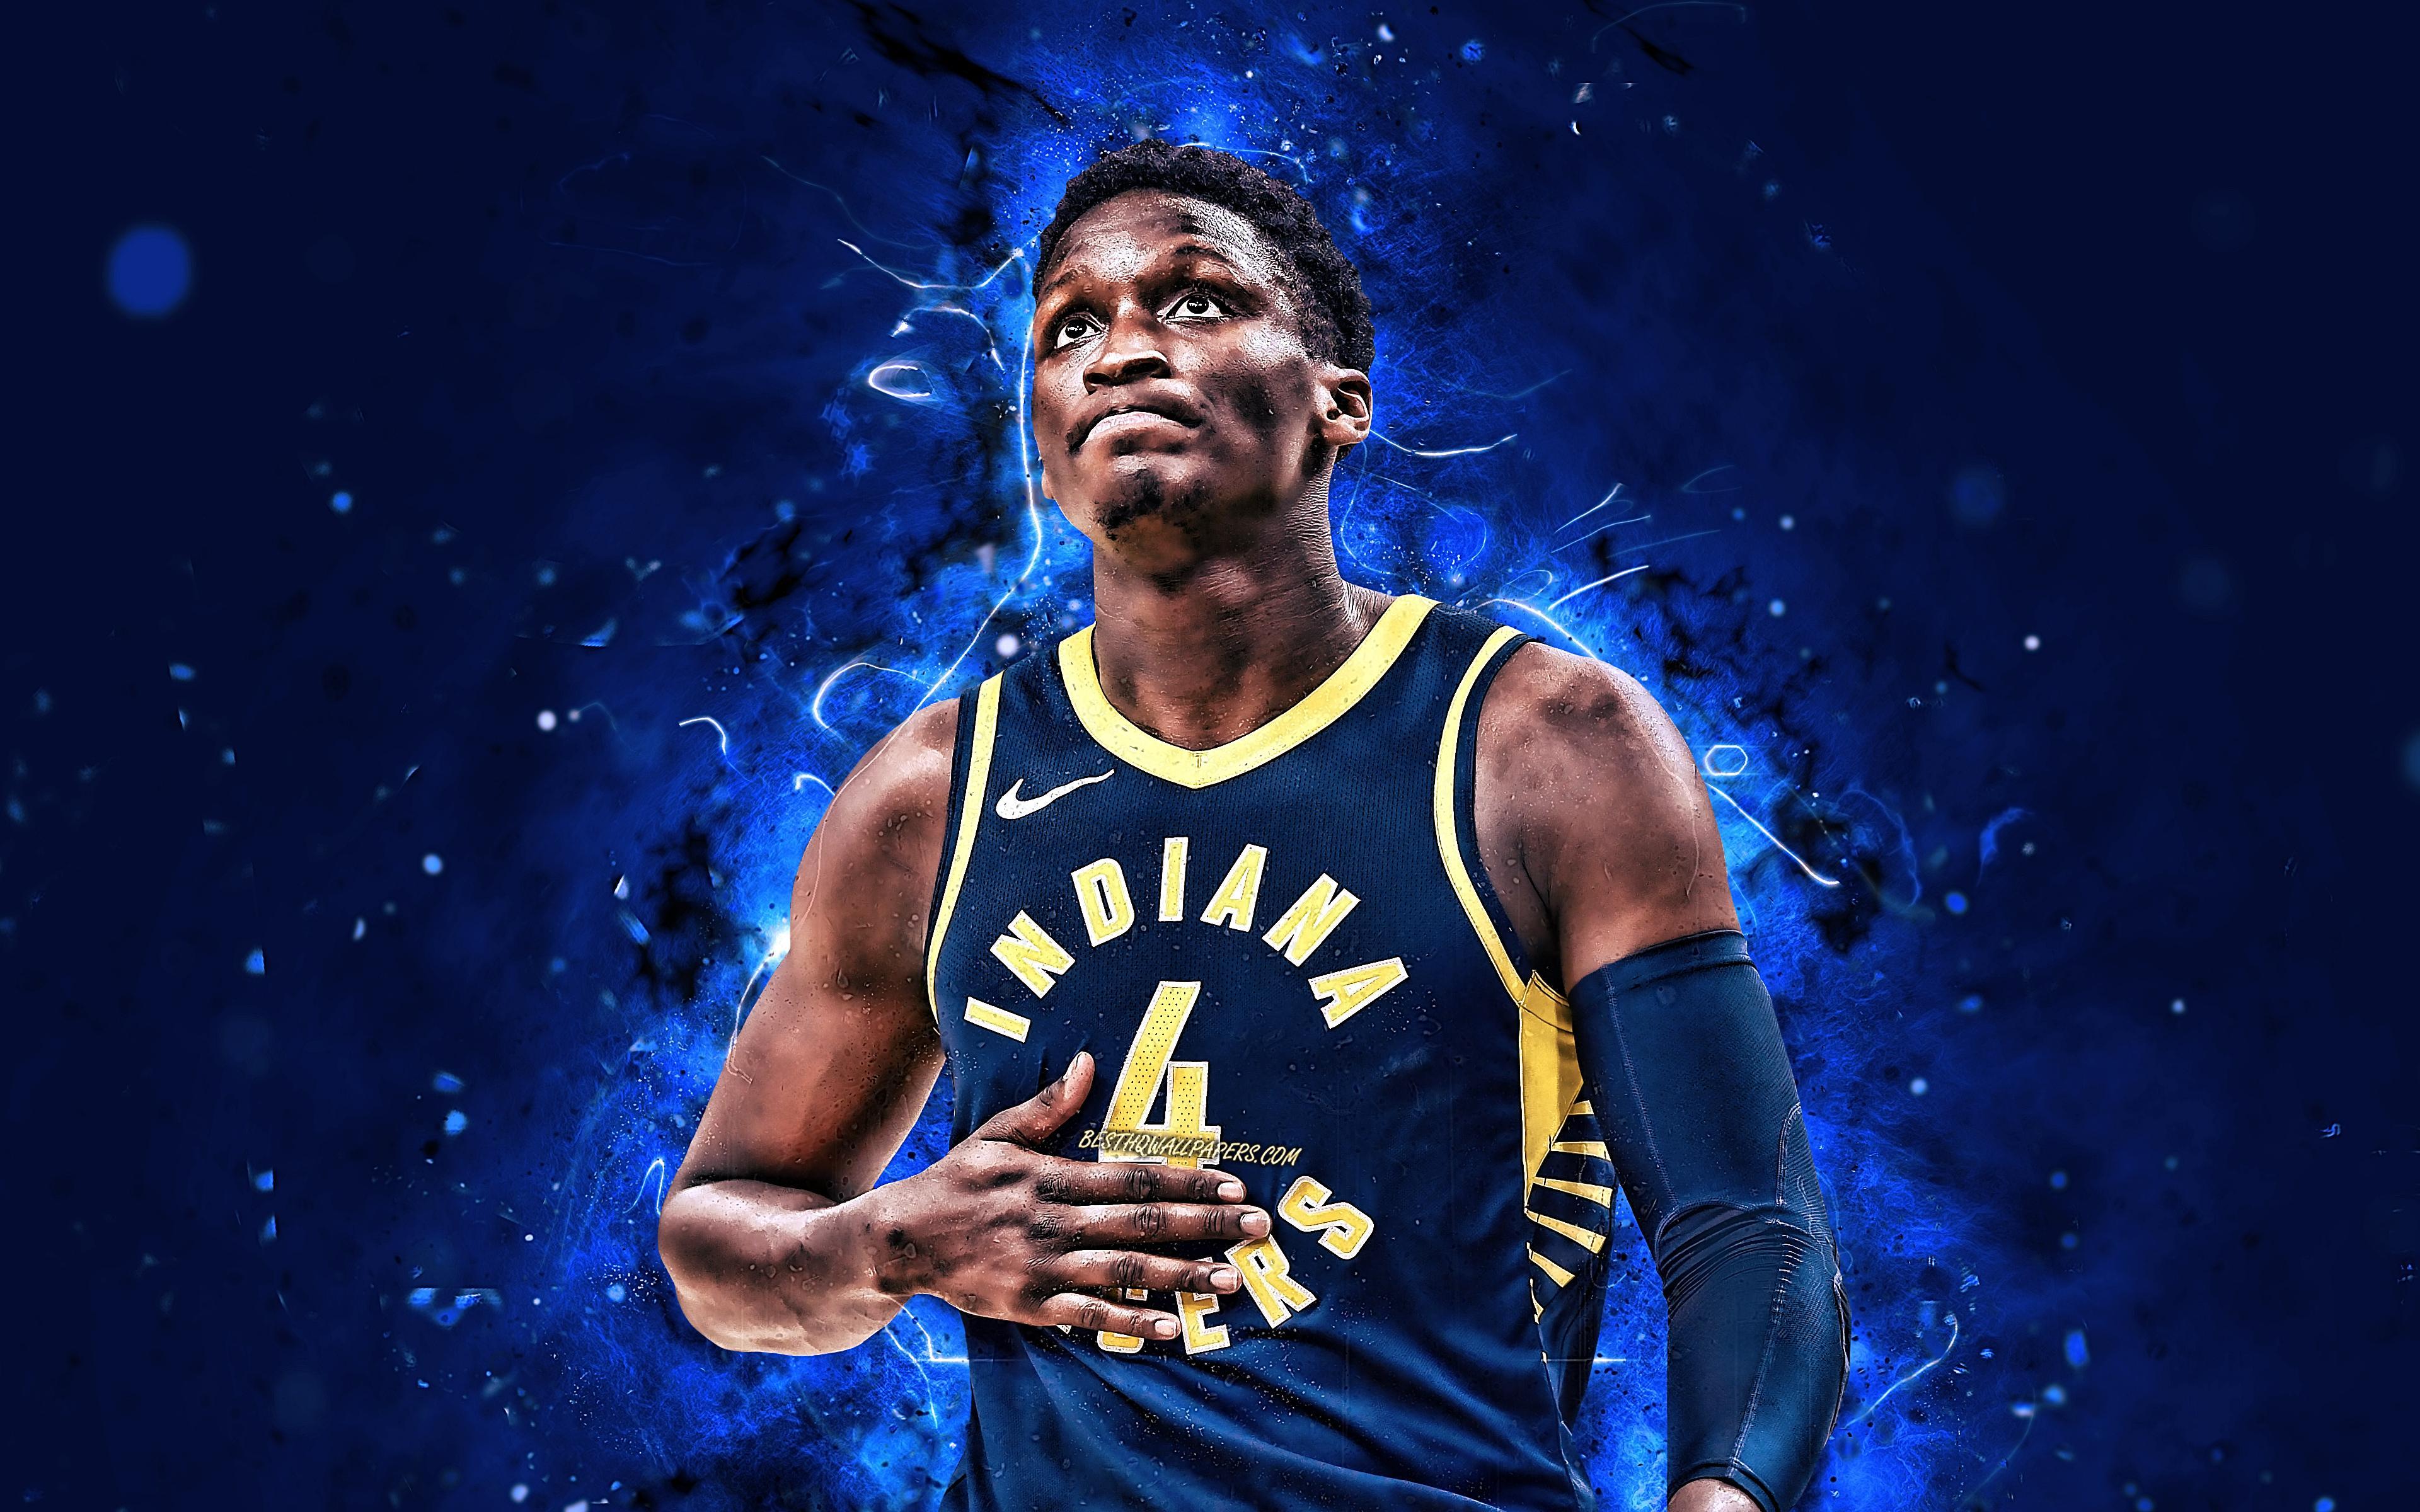 Download wallpaper Victor Oladipo, 4k, basketball stars, NBA, Indiana Pacers, blue uniform, Kehinde Babatunde Oladipo, basketball, neon lights, creative for desktop with resolution 3840x2400. High Quality HD picture wallpaper